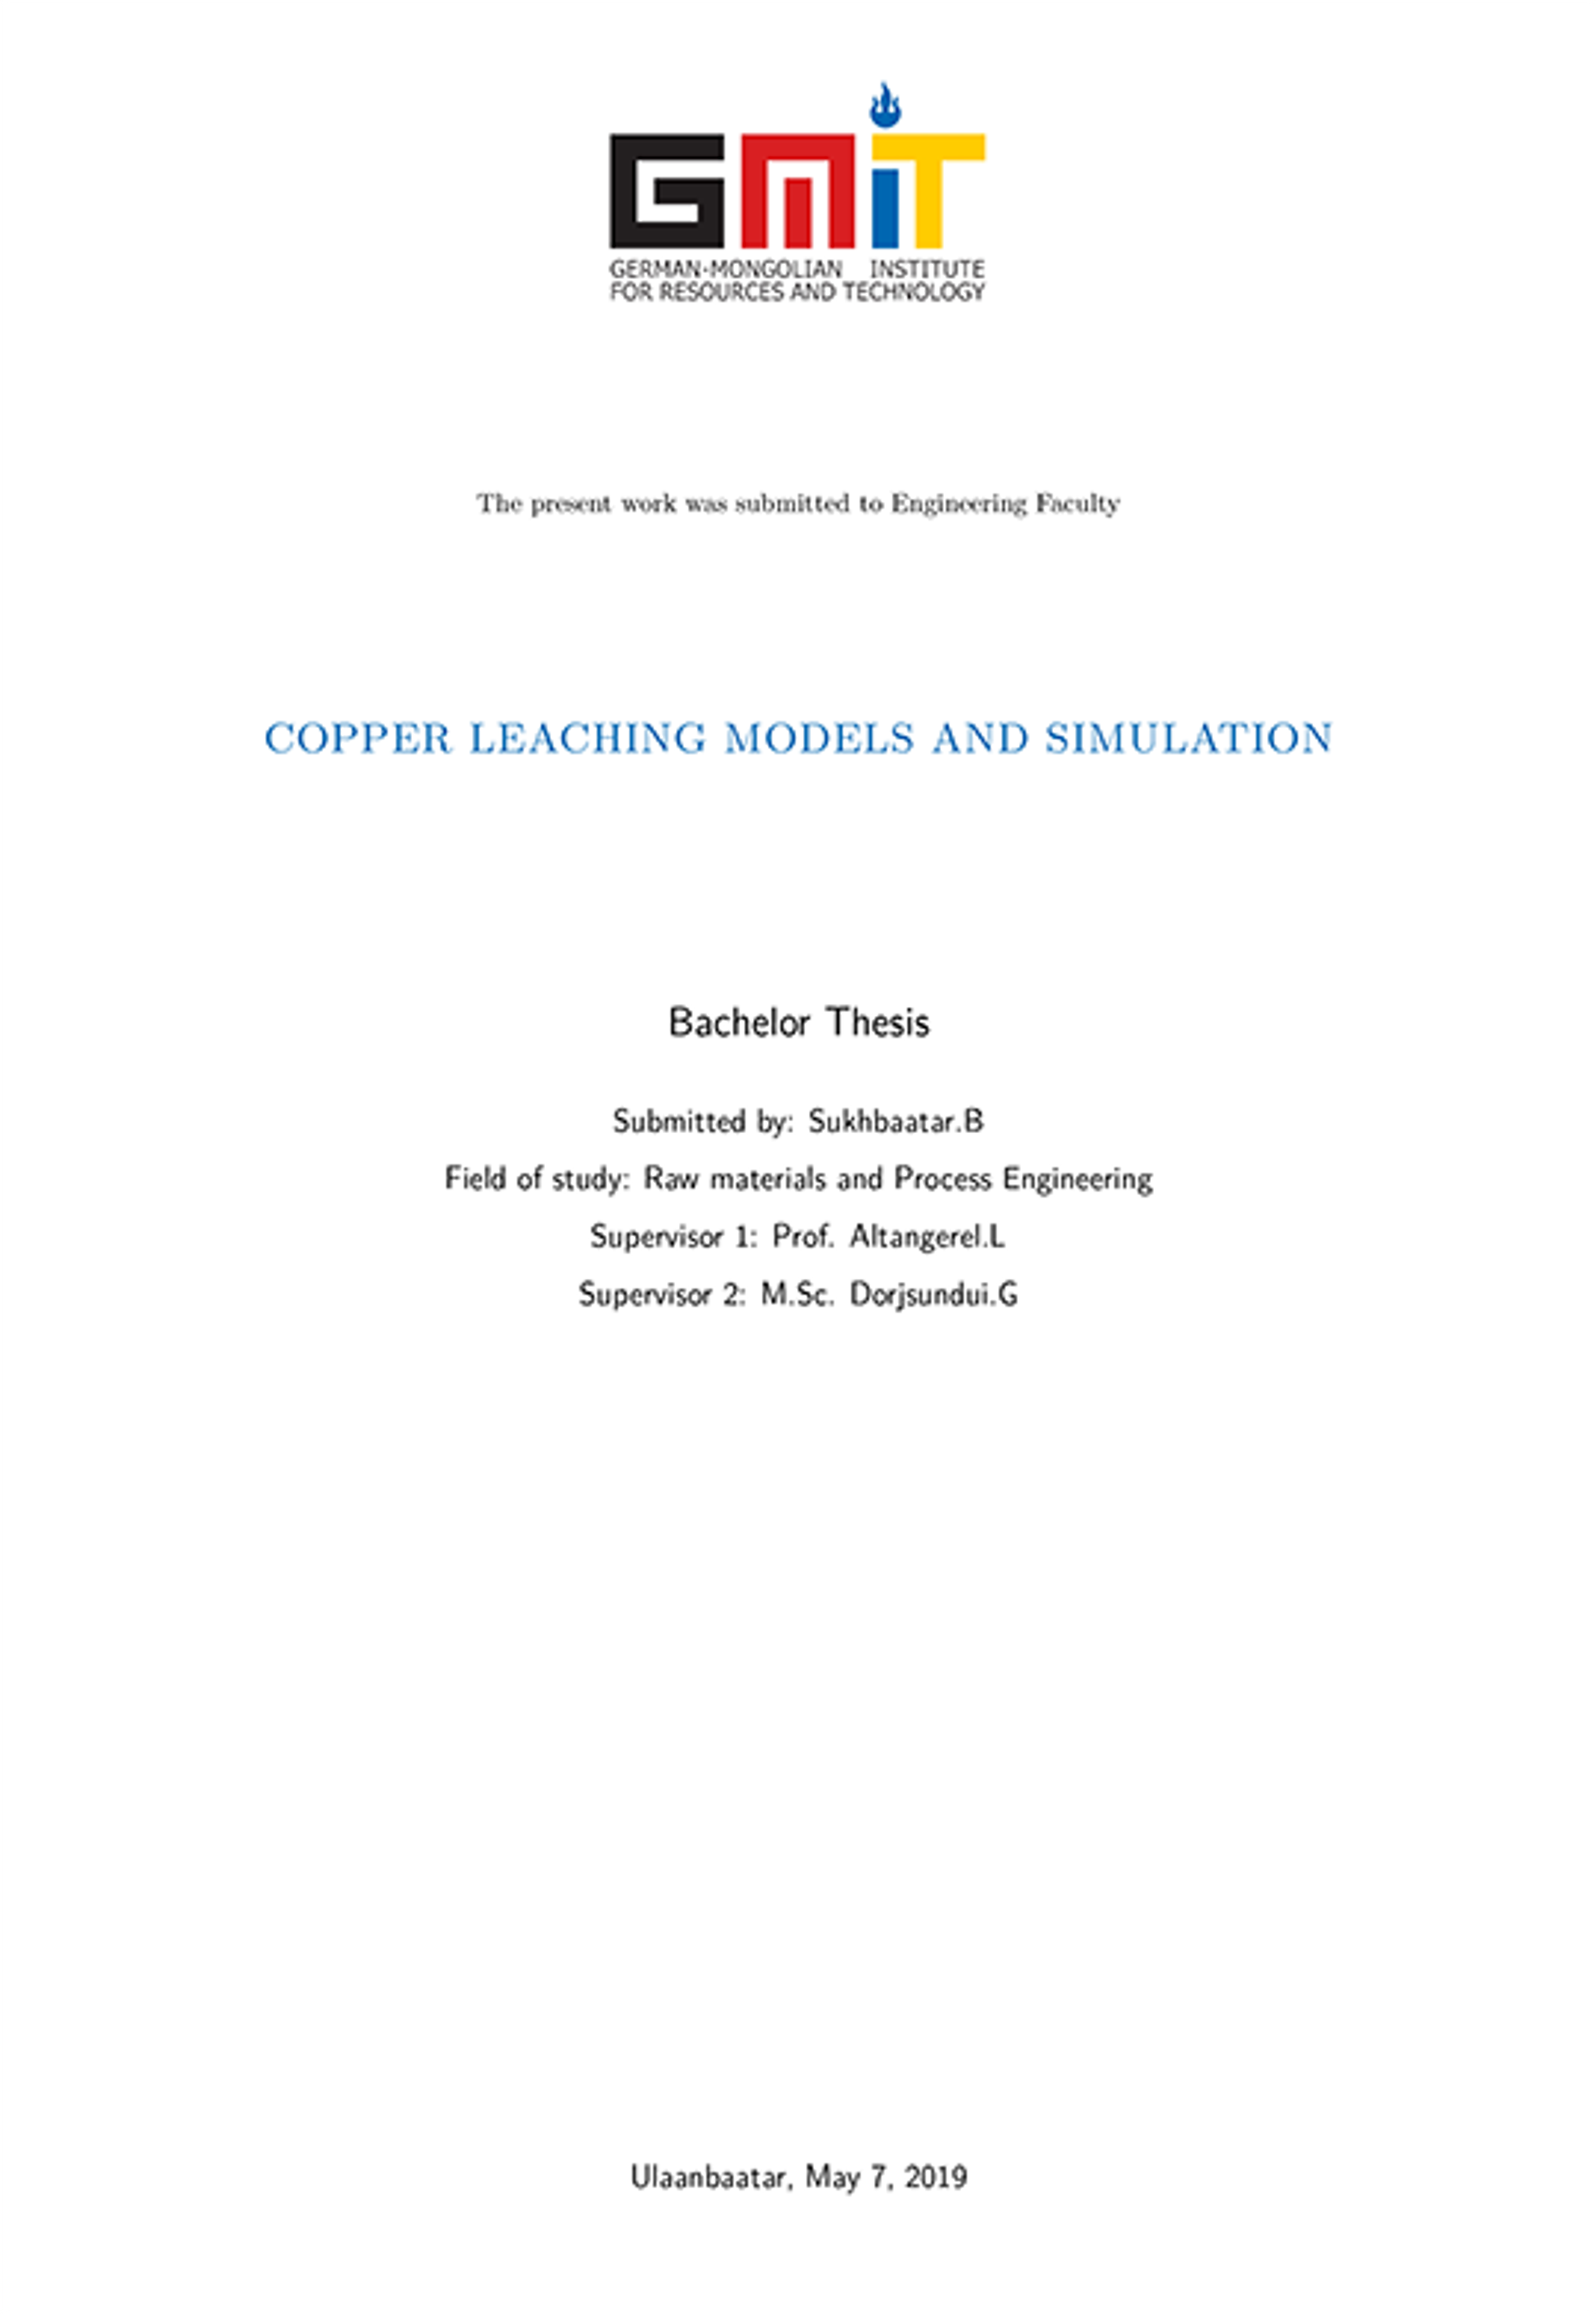 Copper leaching models and simulation